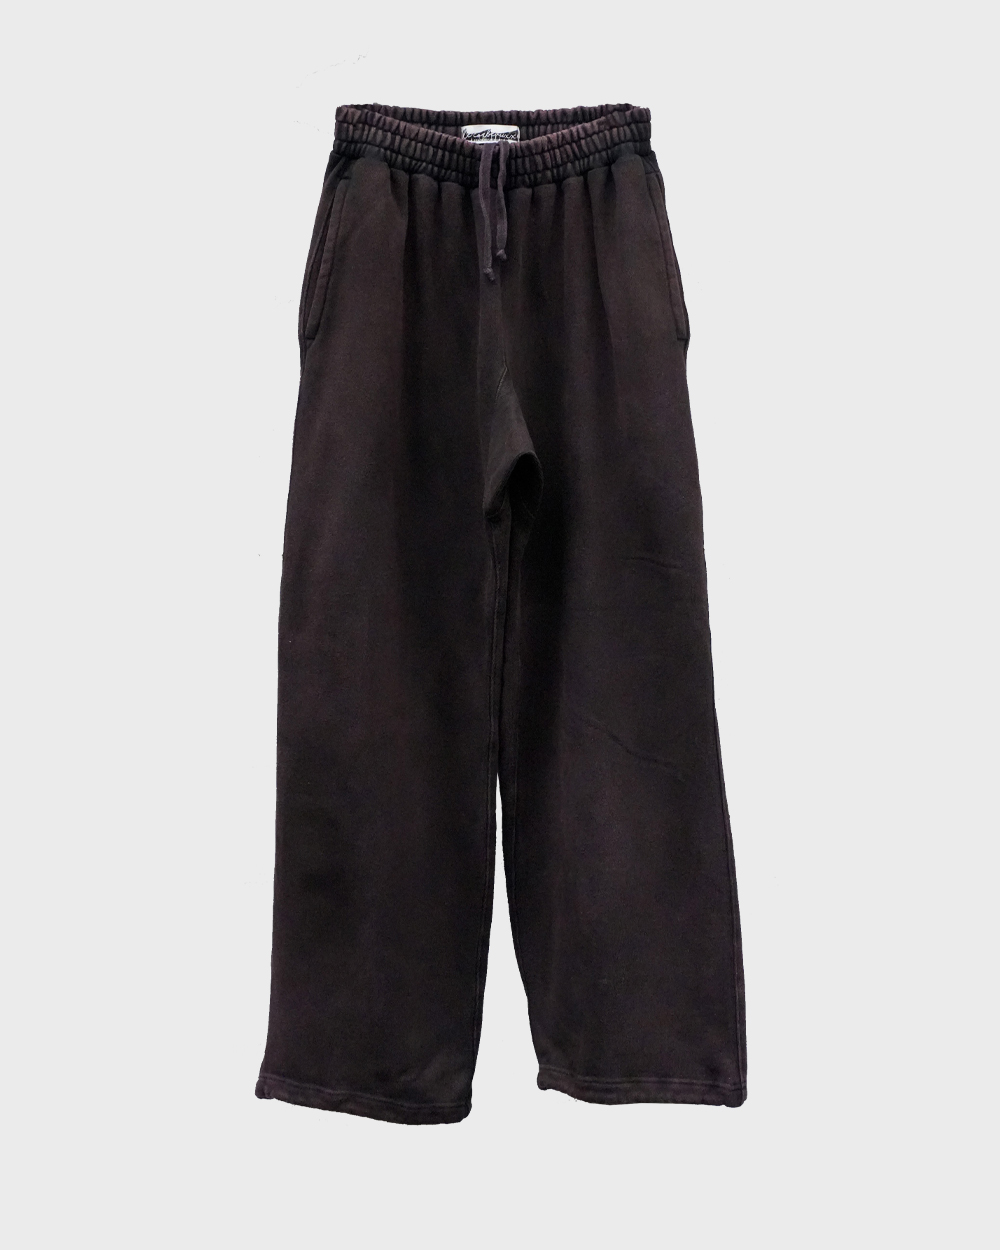 Sweat Pants_Silicon Paint Dyeing (Black)